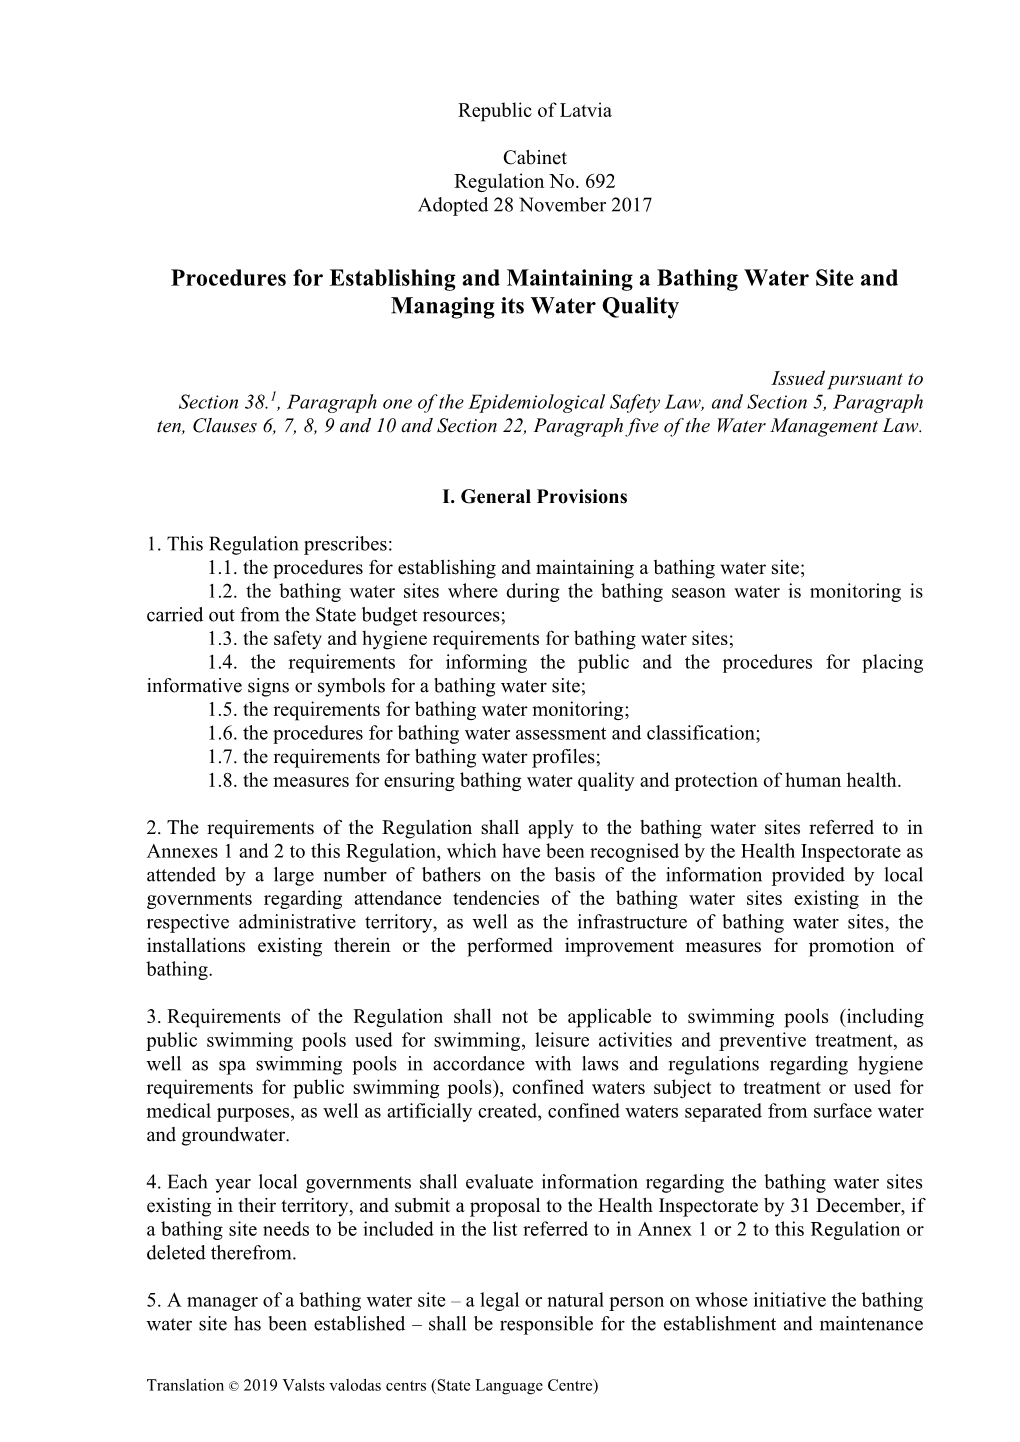 Procedures for Establishing and Maintaining a Bathing Water Site and Managing Its Water Quality